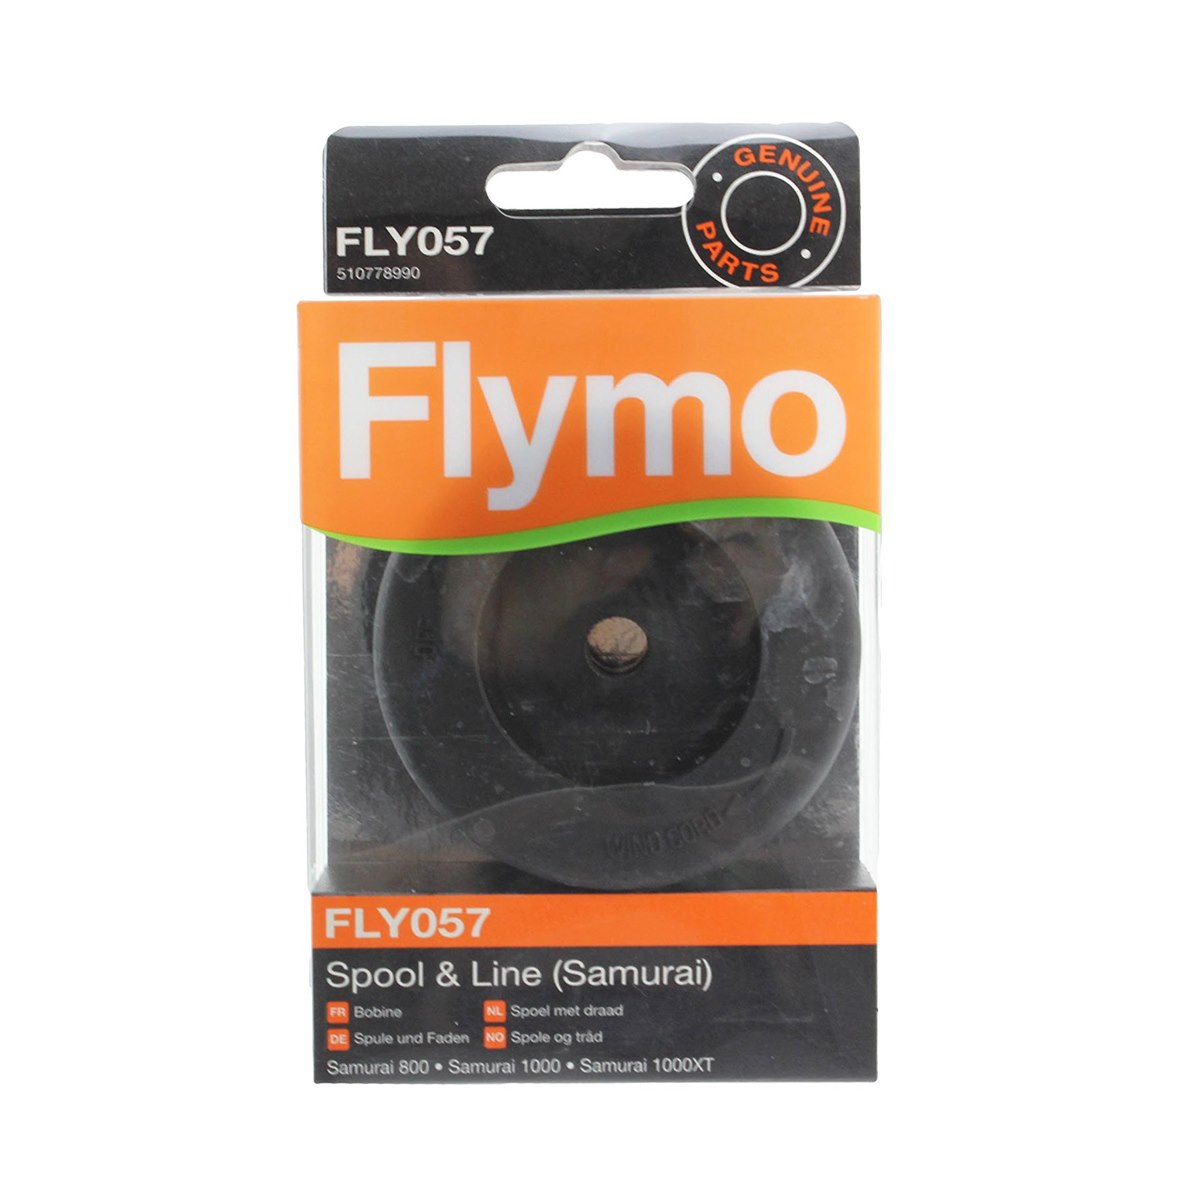 FLY057 Genuine Flymo Replacement Spool and Line